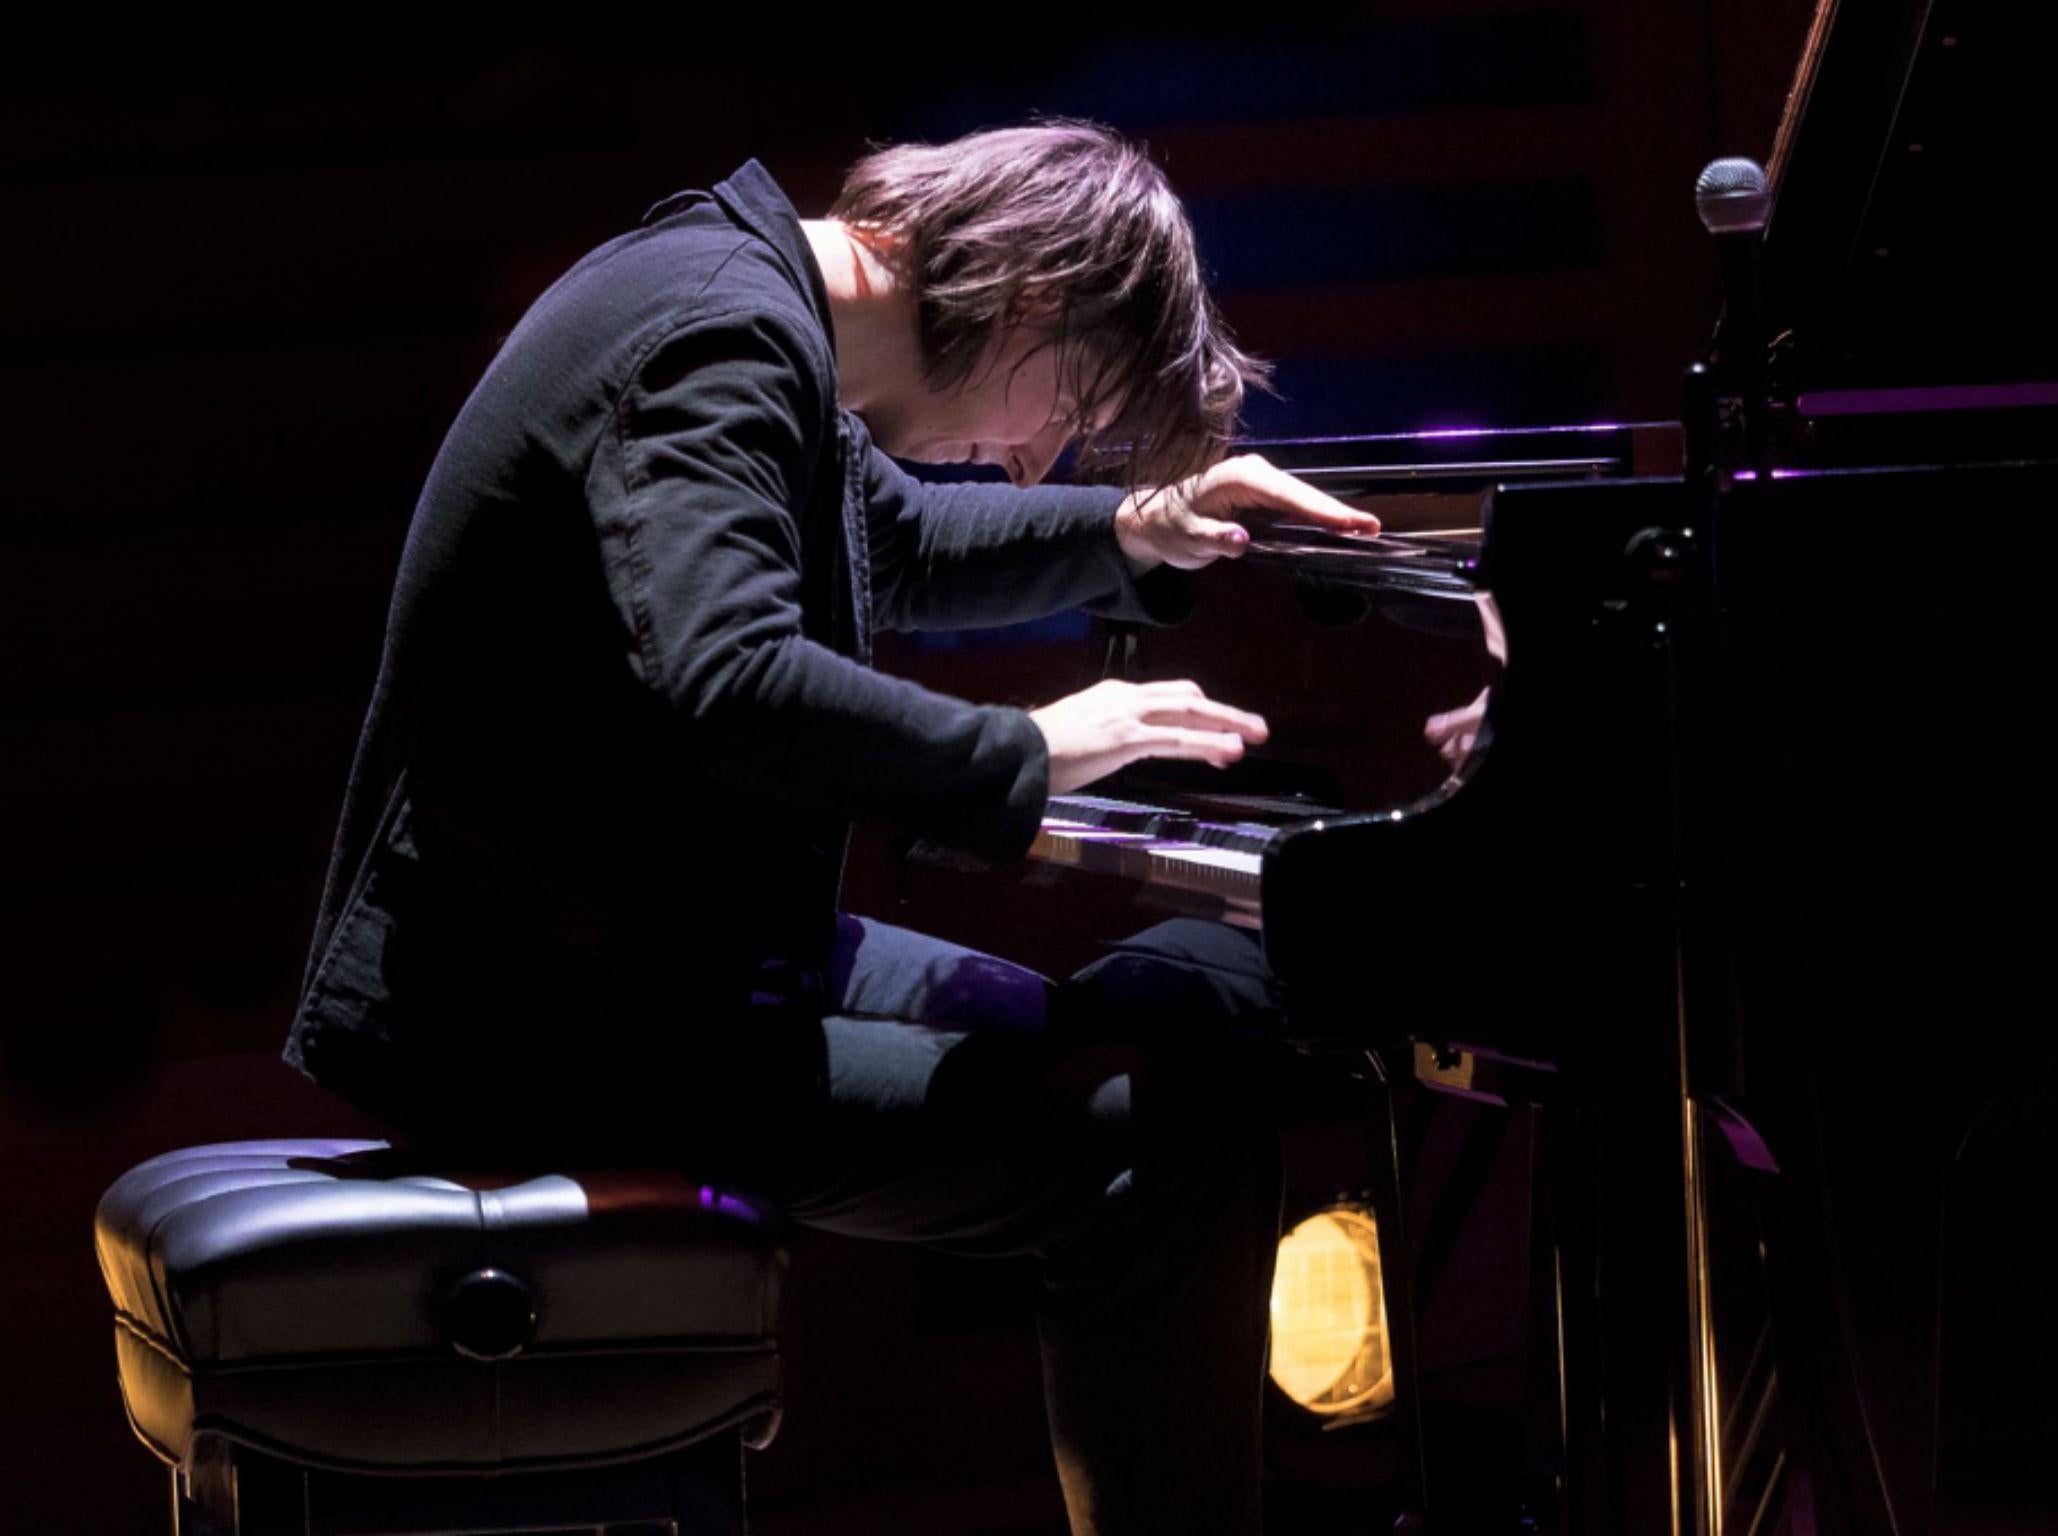 German pianist Michael Wollney performs at the London Jazz Festival with his trio